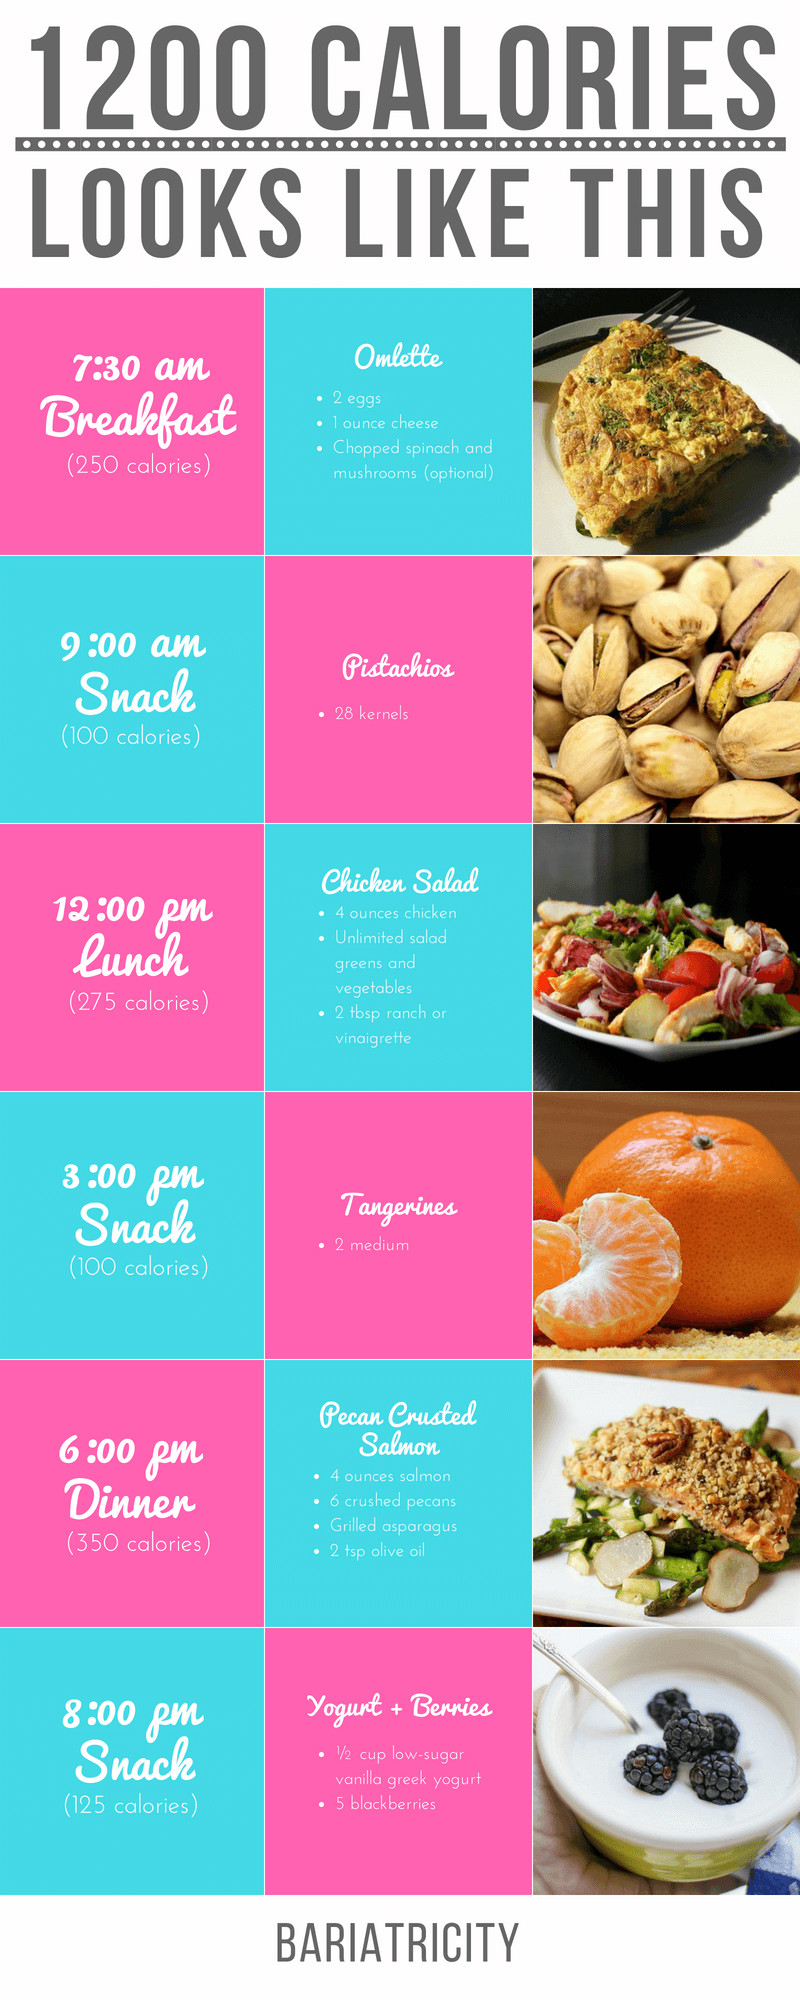 Low Calorie Diet Meals
 1 200 Calories Looks Like This [Diet and Meal Plan